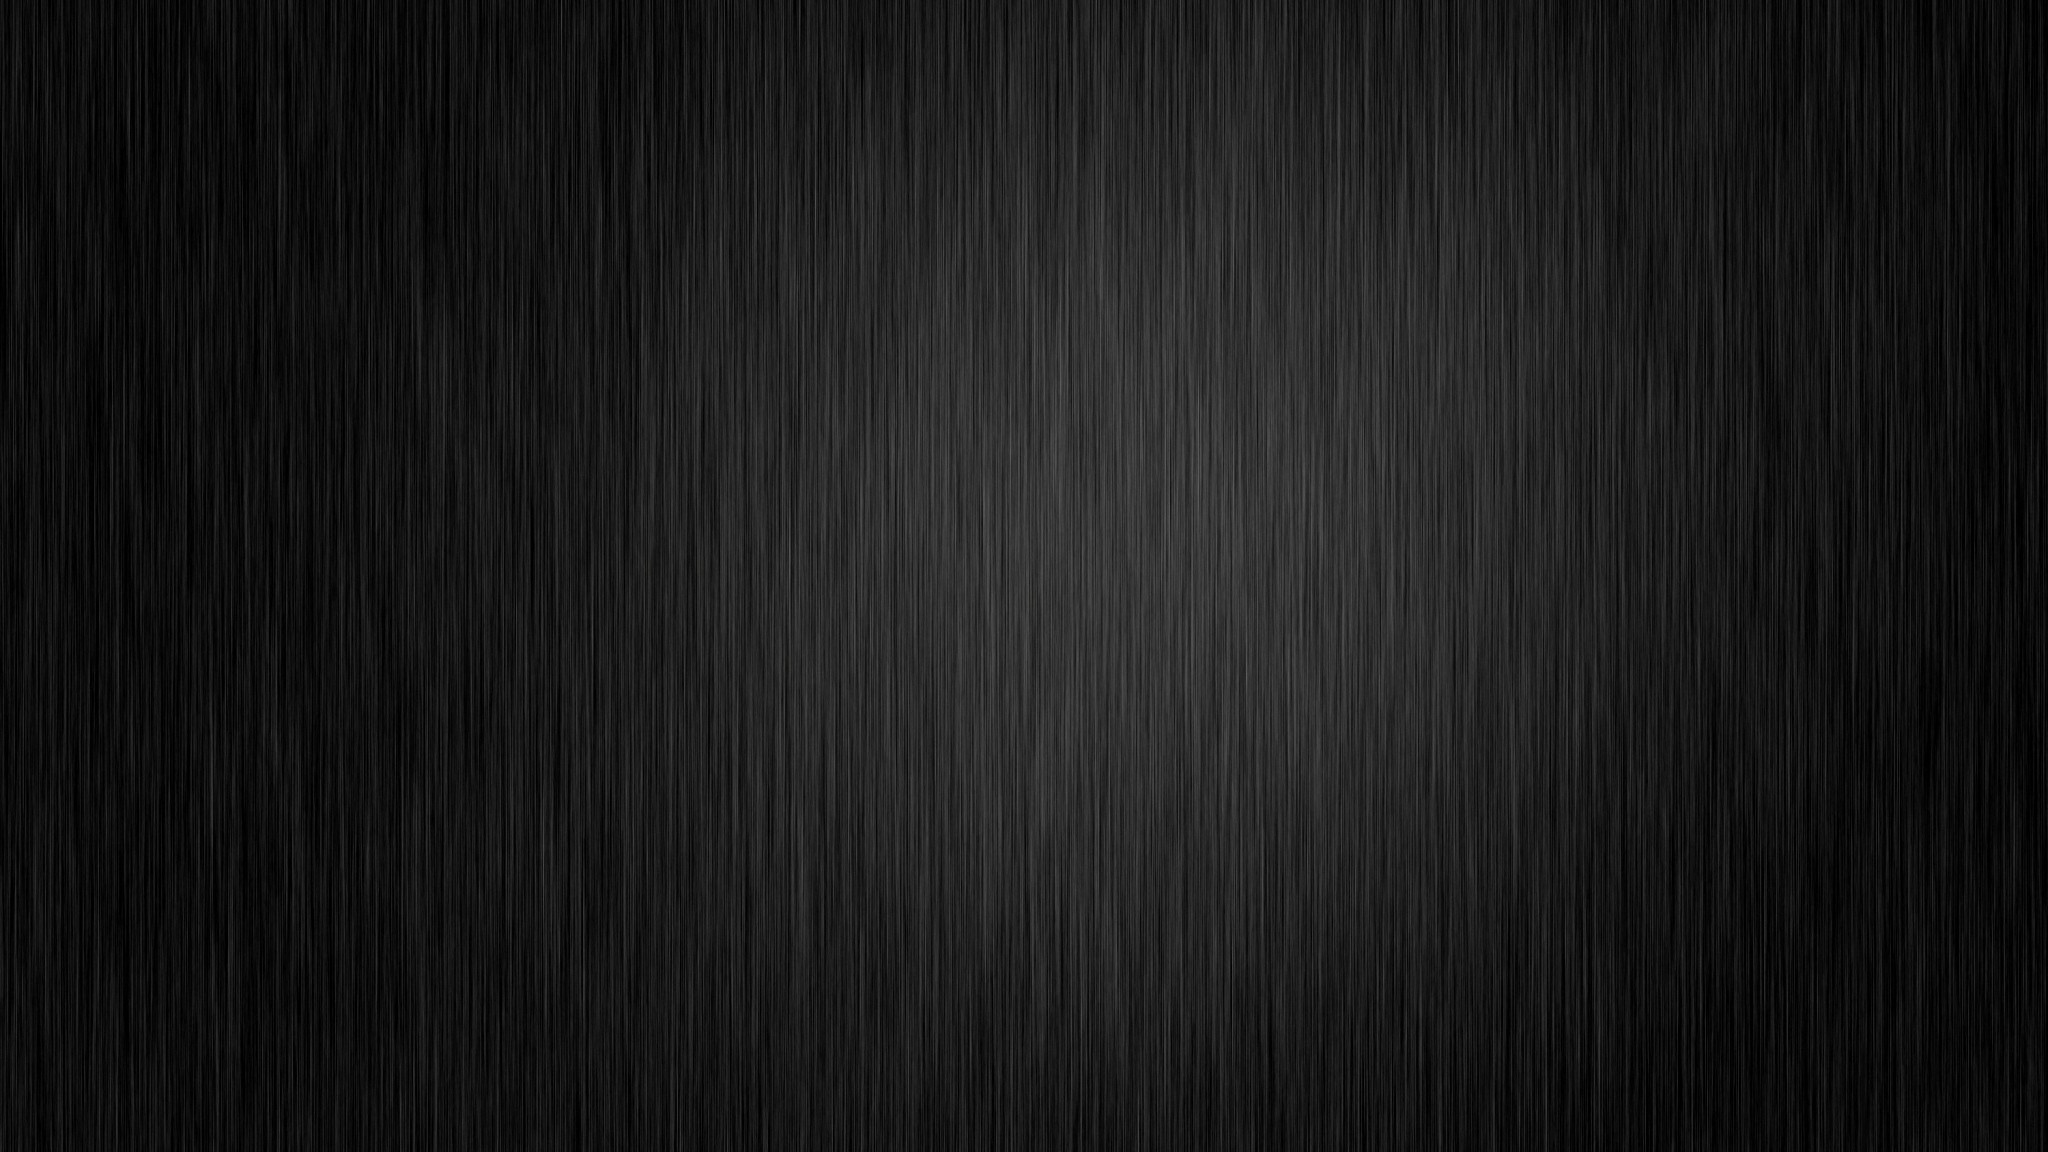  Black  background  HD    Download free cool wallpapers  for 